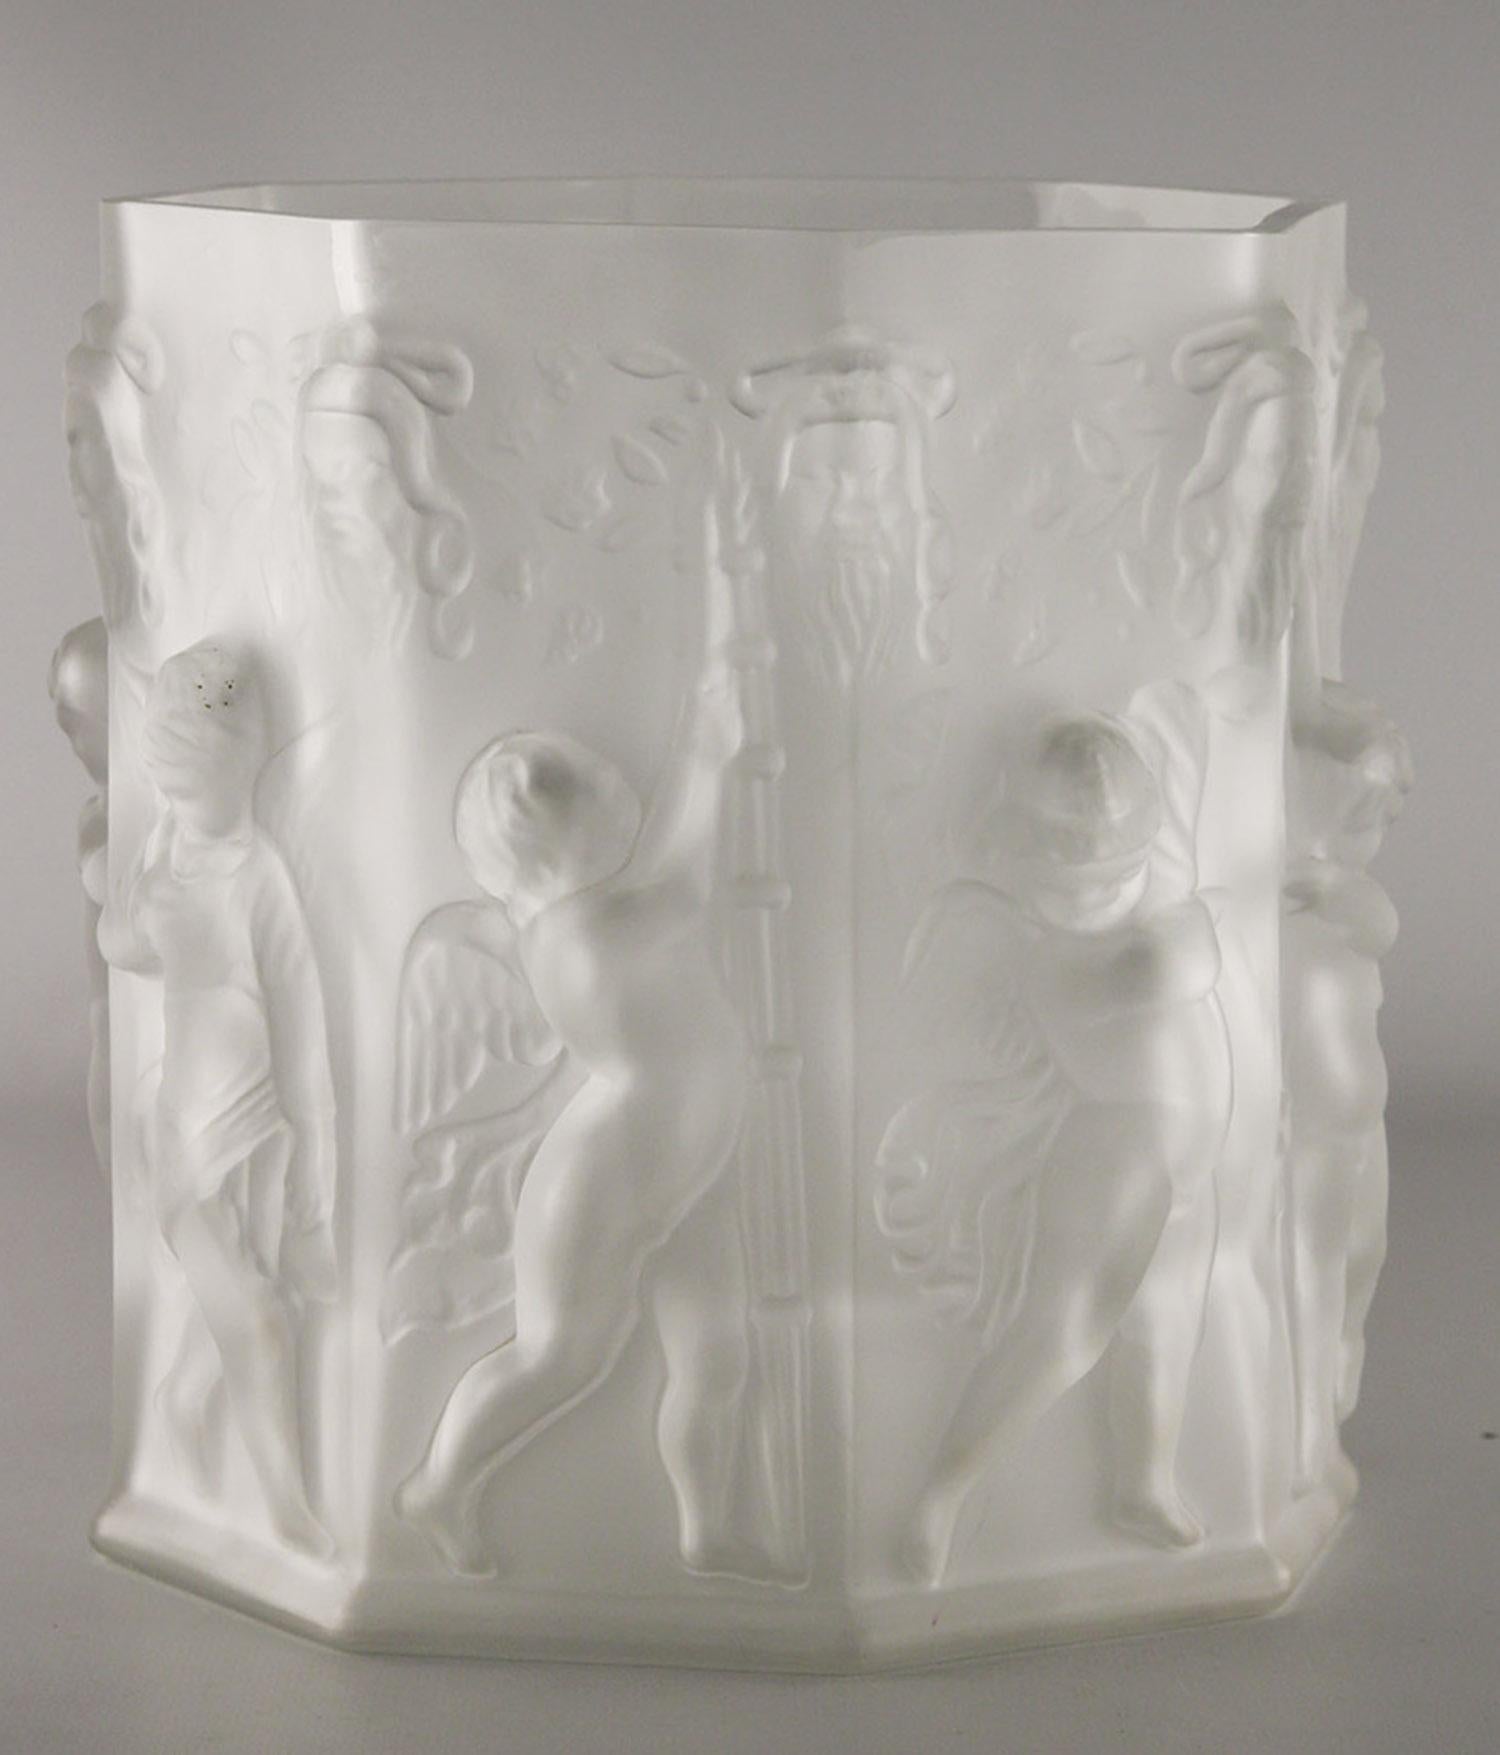 Early 20th century french octagonal frosted glass vase centerpiece decorated with Cherubs

By: unknown
Material: glass
Technique: etched, embossed, frosted, molded
Dimensions: 7 in x 8.5 in
Date: early 20th century
Style: Art Nouveau, Belle